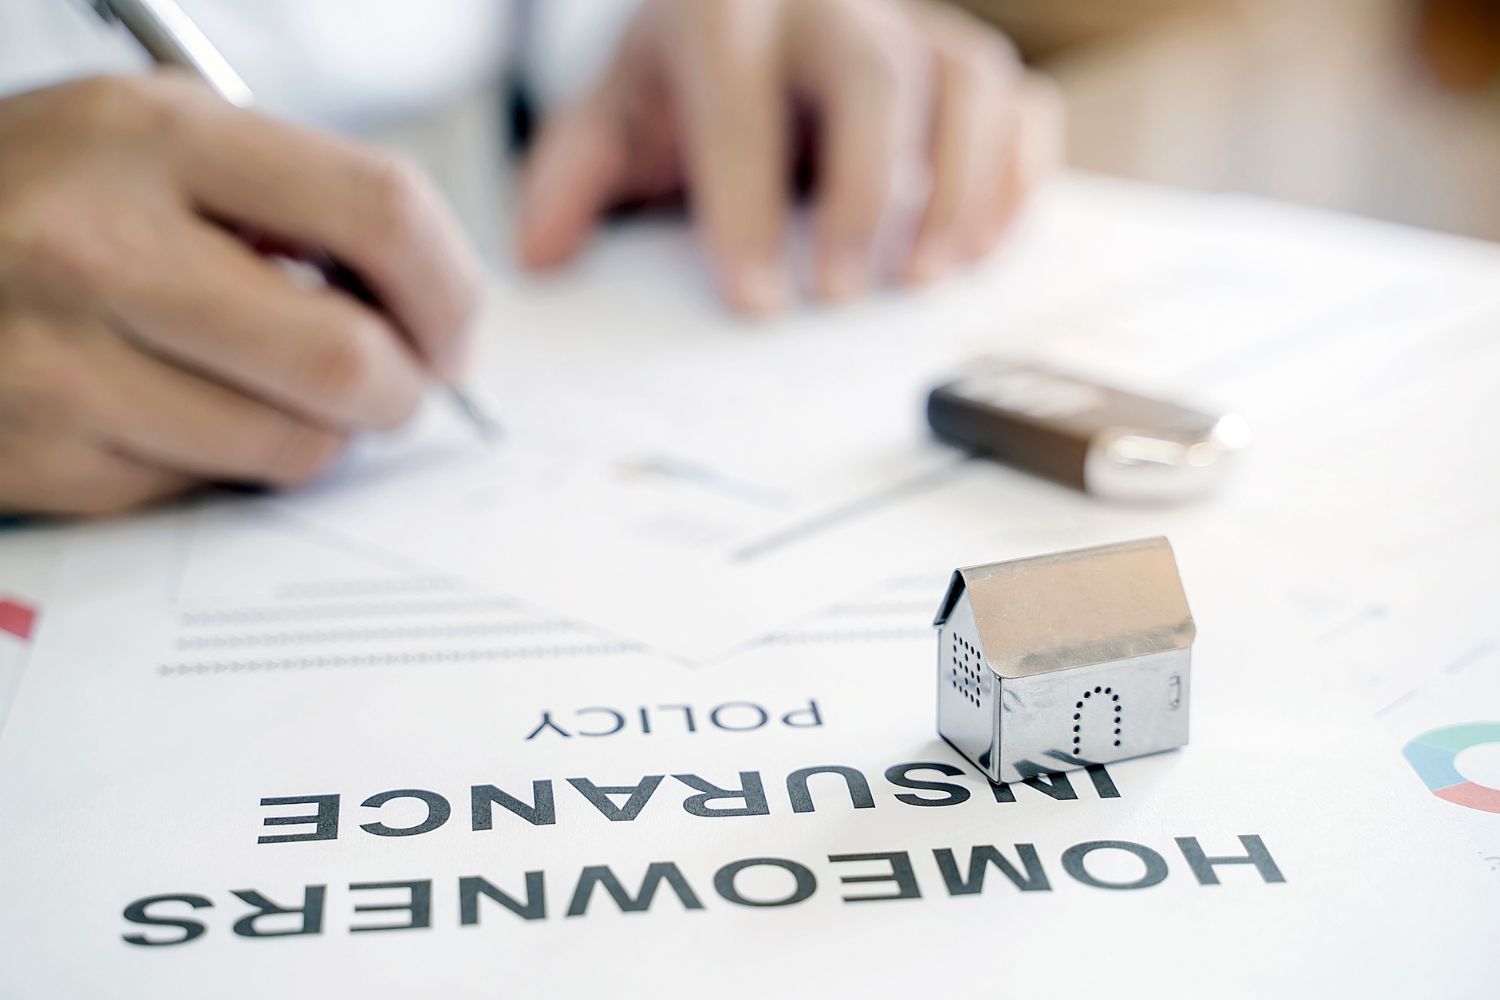 A small model house sits on a document called 'Homeowners insurance policy' while a person writes in the background.